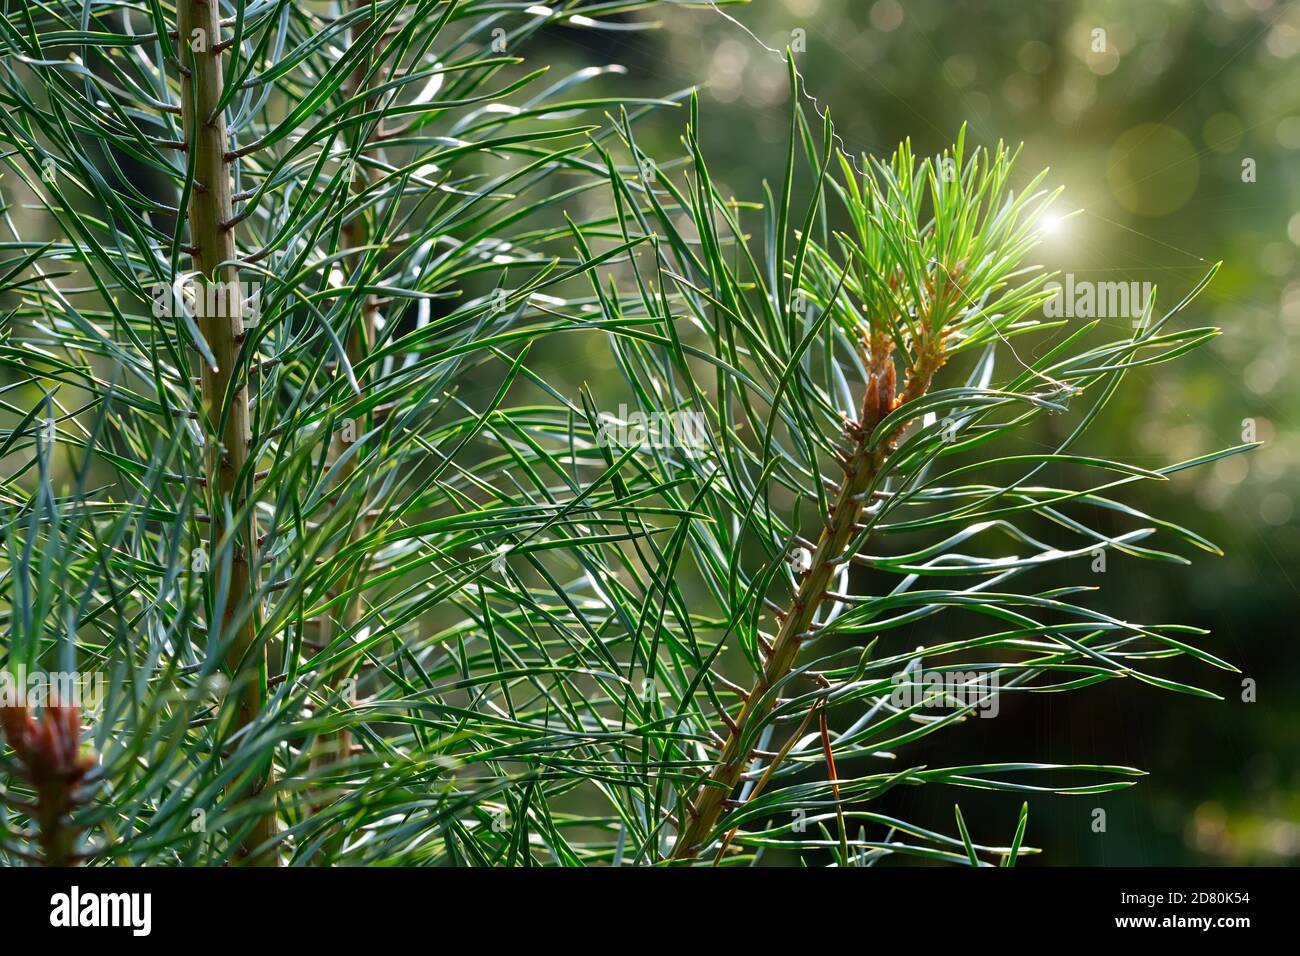 Pine branches close-up in the background light. Beautiful natural background Stock Photo